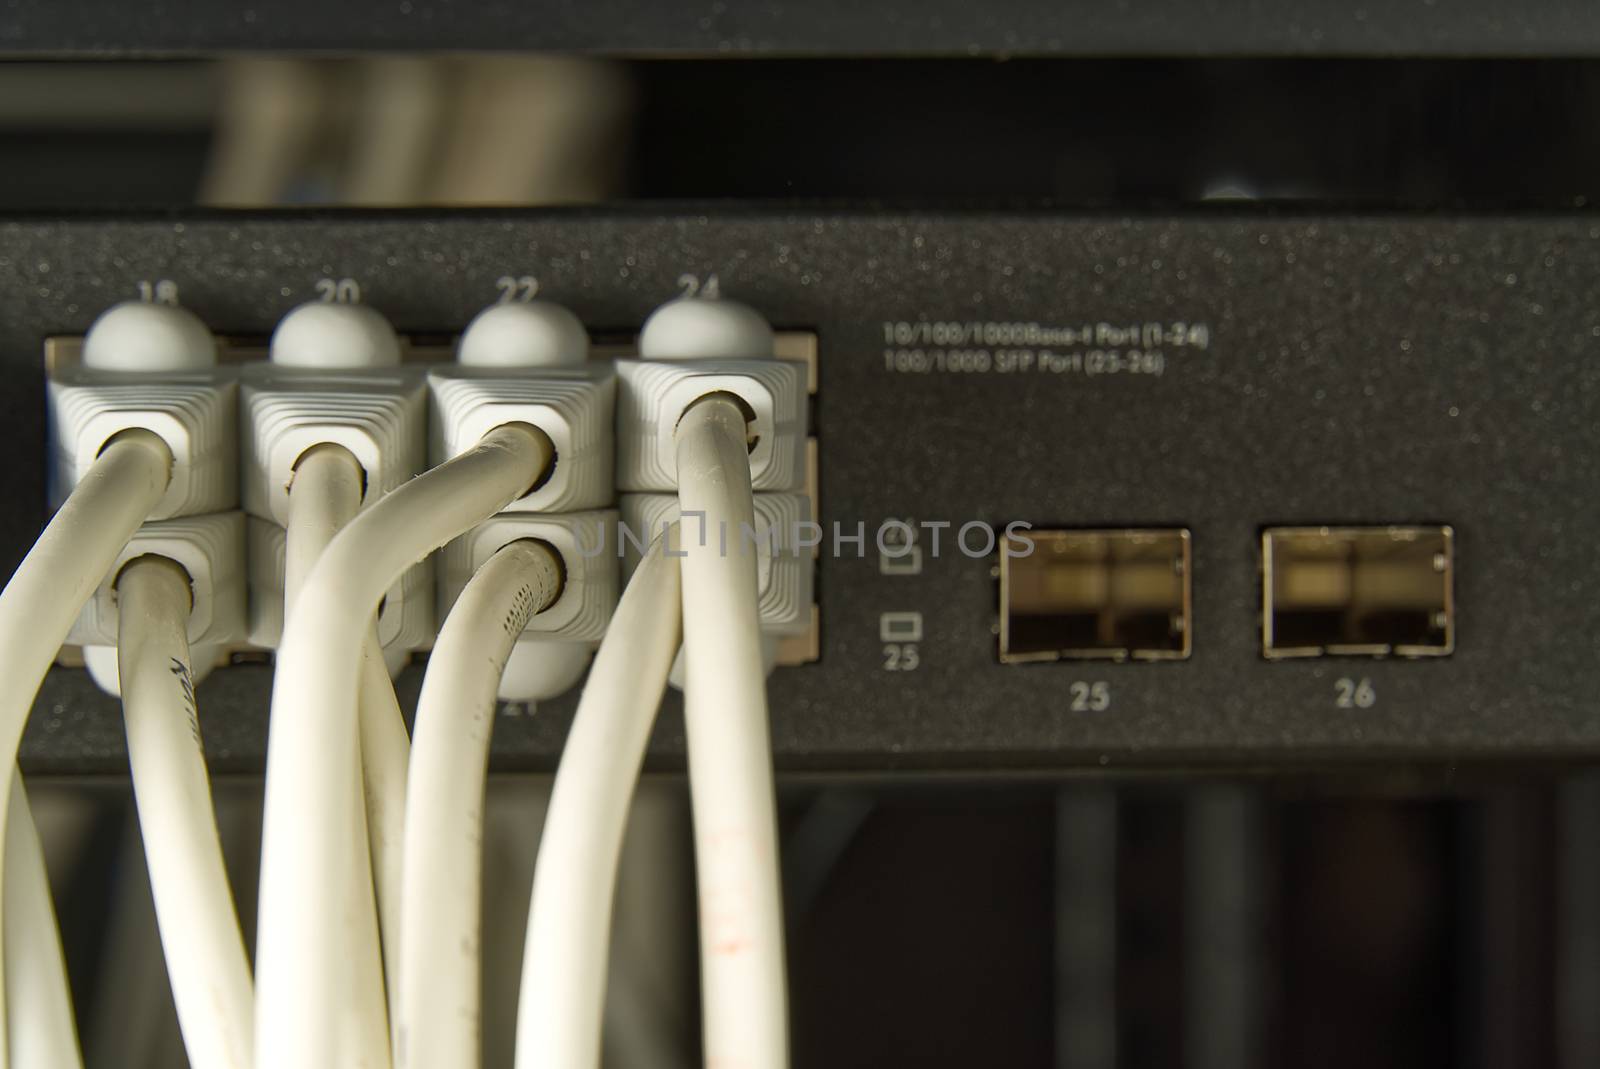 Network switch and ethernet cable in rack cabinet. Network connection technology thrue cat6 and cat5 wires. Network switch and cables